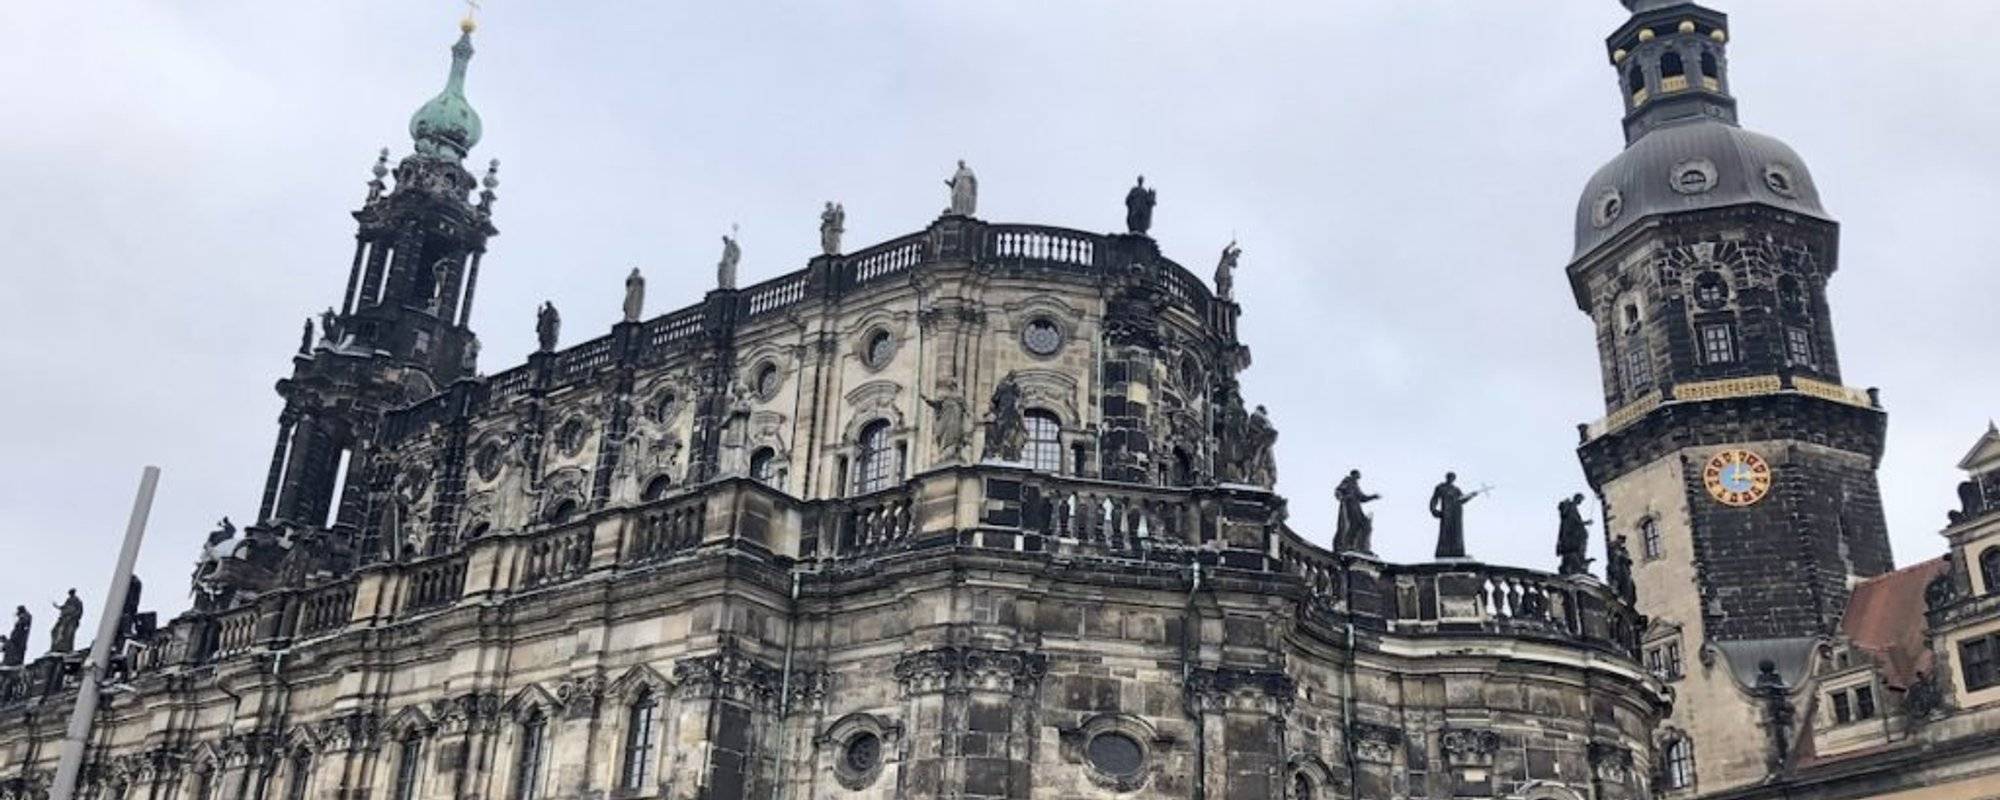 Dresden Old Town - Cathedral of the Holy Trinity & Fürstenzug